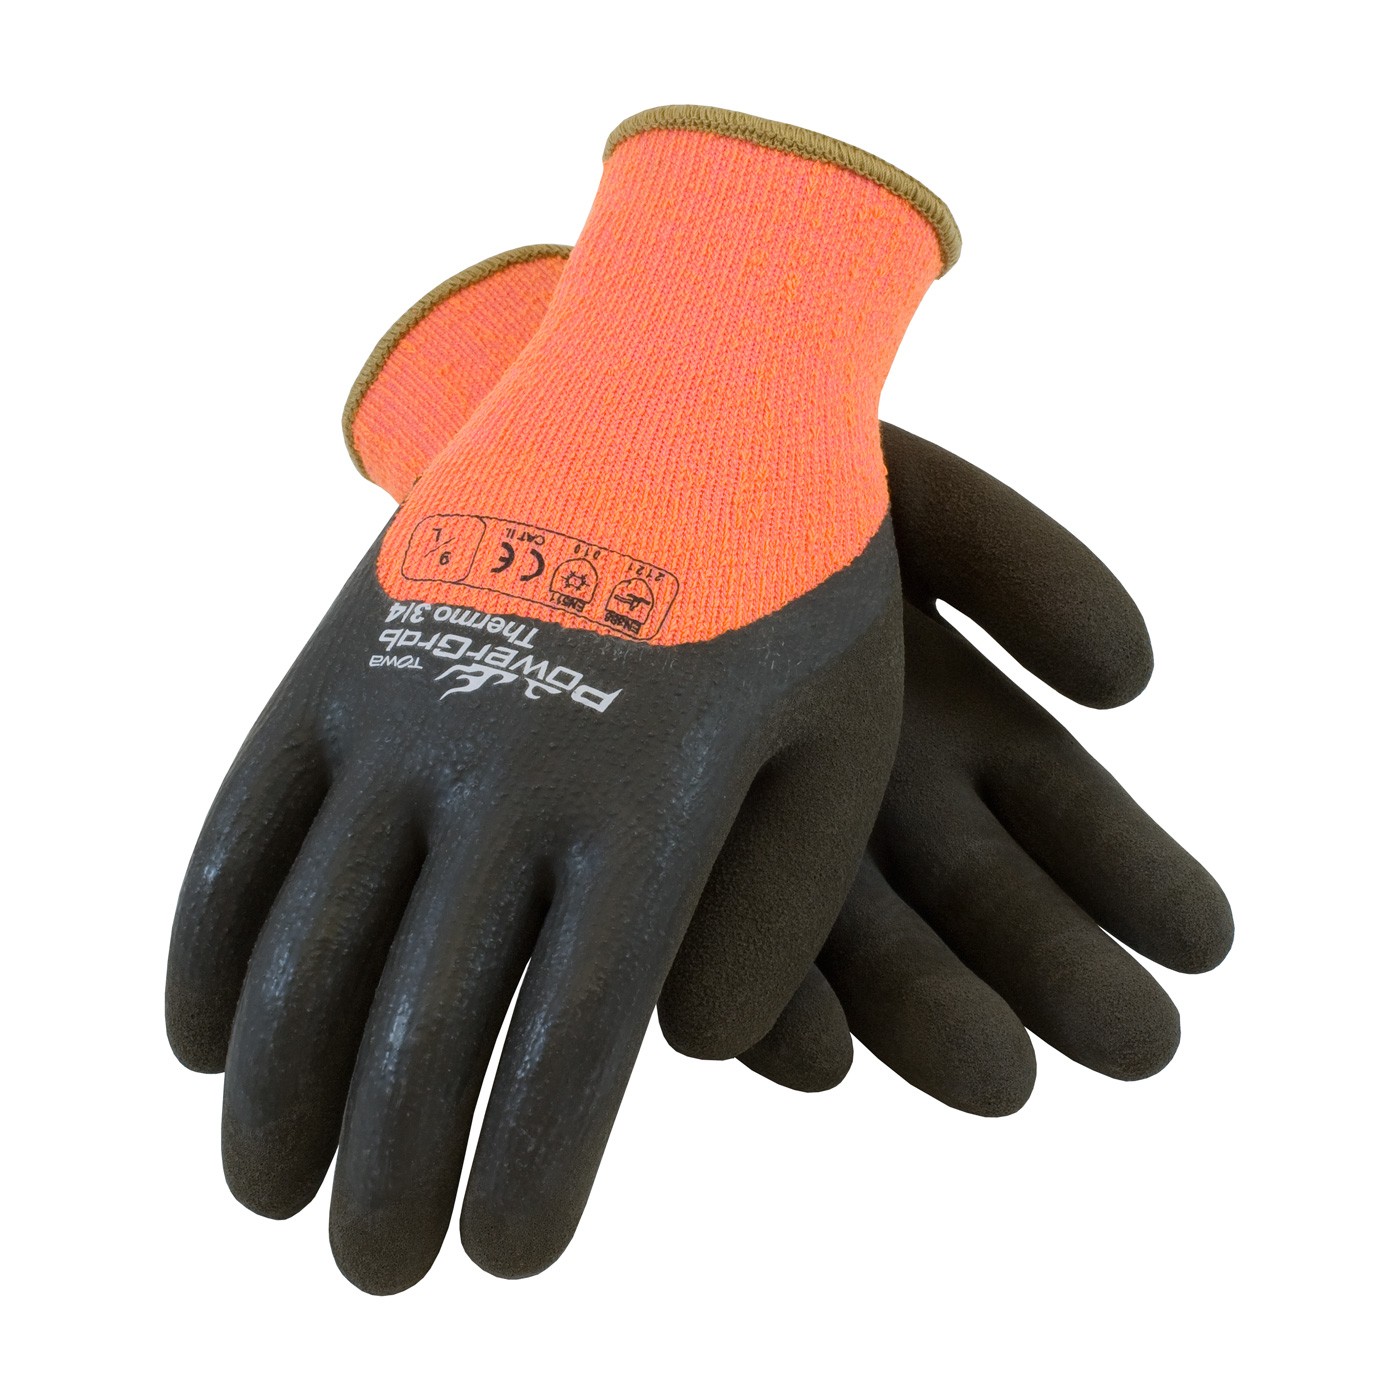 Hi-Vis Orn. Acrylic Terry Shell, 3/4 Dip Brown MicroFinish Grip Size 2X-Large